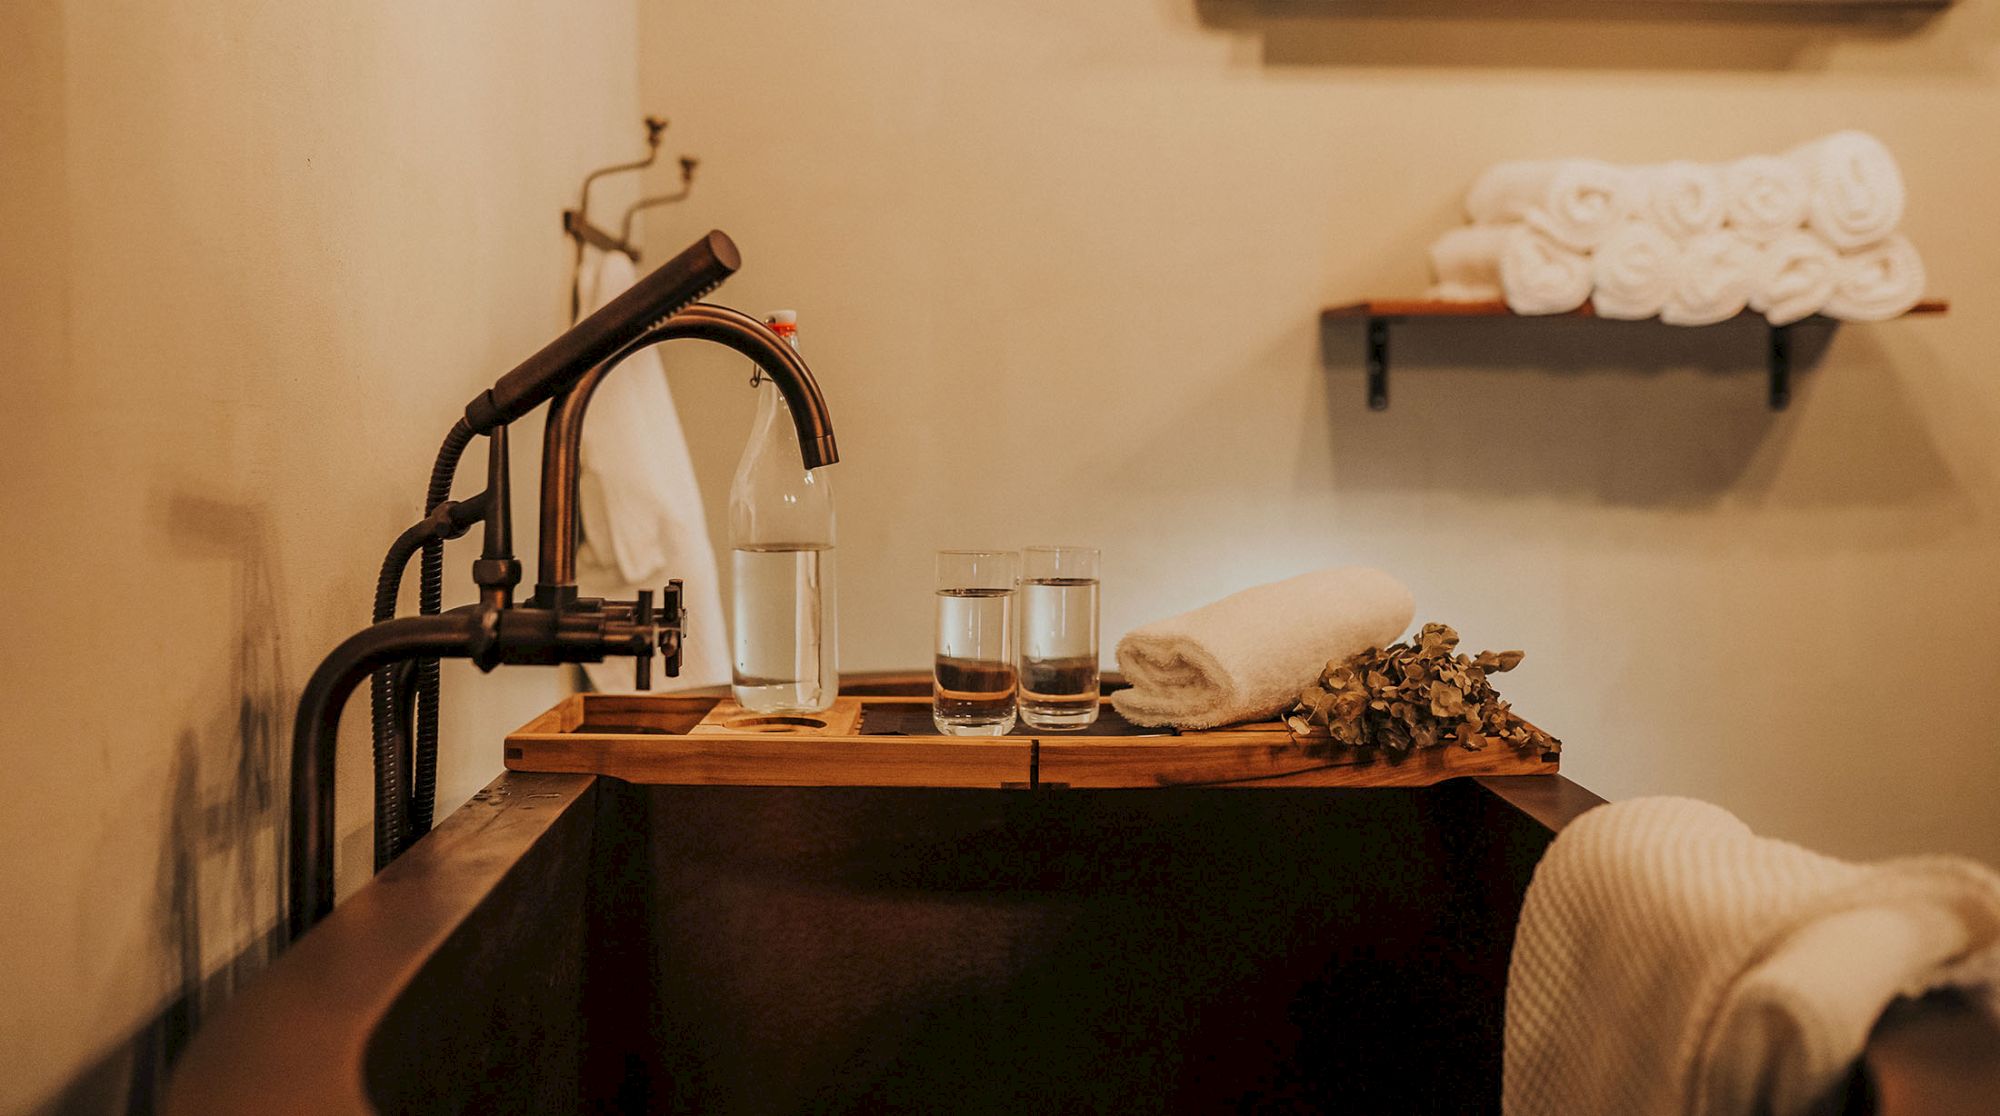 A cozy bathroom setup with a rustic faucet, wooden bathtub tray holding water glasses, folded towels, and a shelf with more towels.